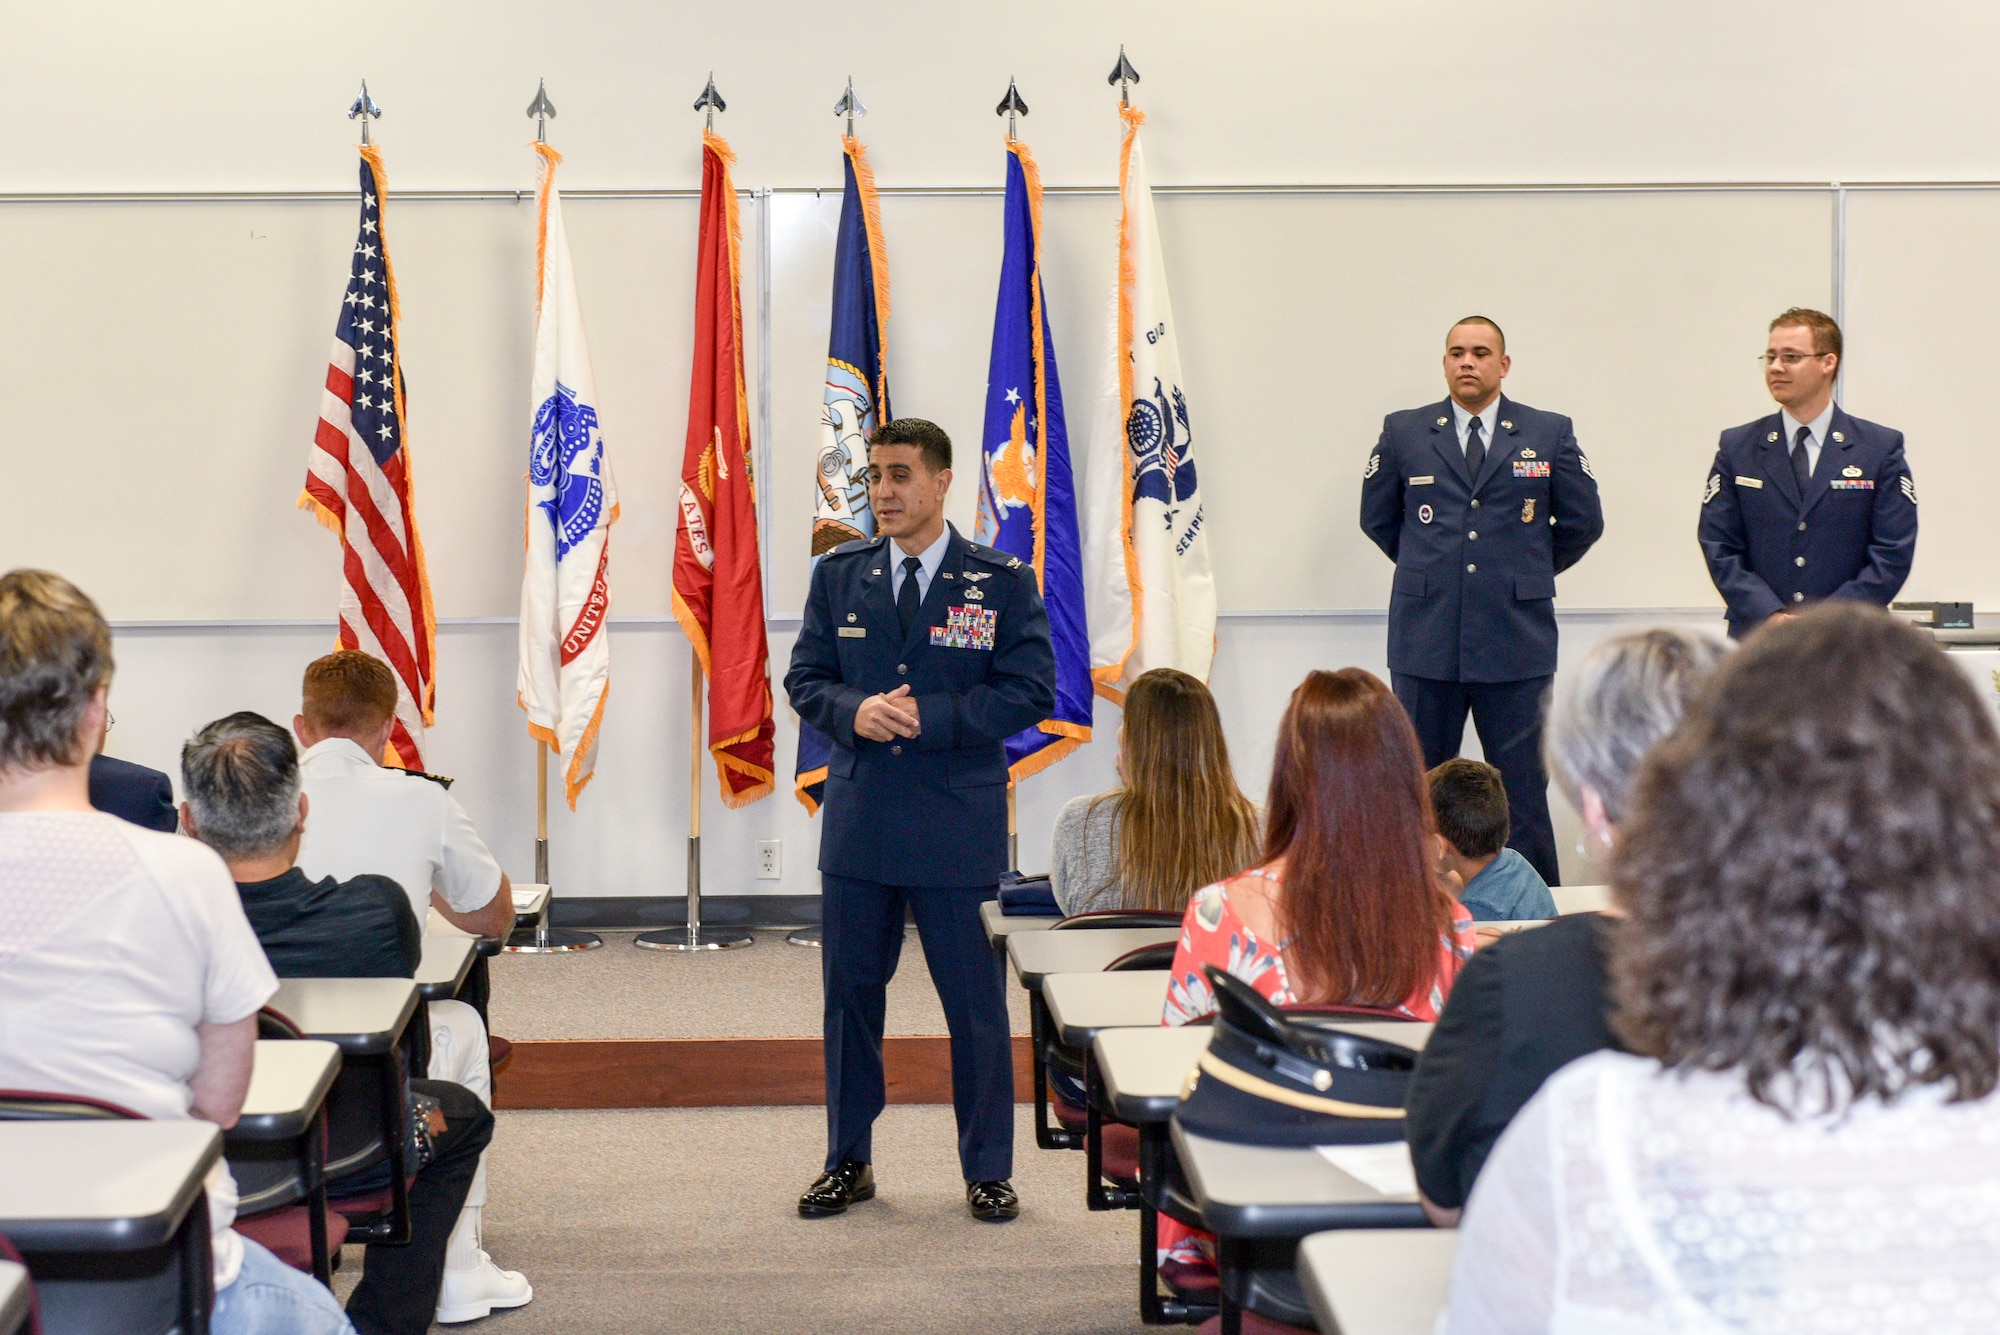 U.S. Air Force Col. Ricky Mills, 17th Training Wing commander, speaks to high school enlistees and their families during the Our Community Salutes ceremony, San Angelo, Texas, May 19, 2018. OCS was established in 2009 as a non-profit organization helping communities recognize, honor and support high school seniors who enlisted in the U.S. armed services after graduation. (U.S. Air Force photo by Senior Airman Randall Moose/Released)